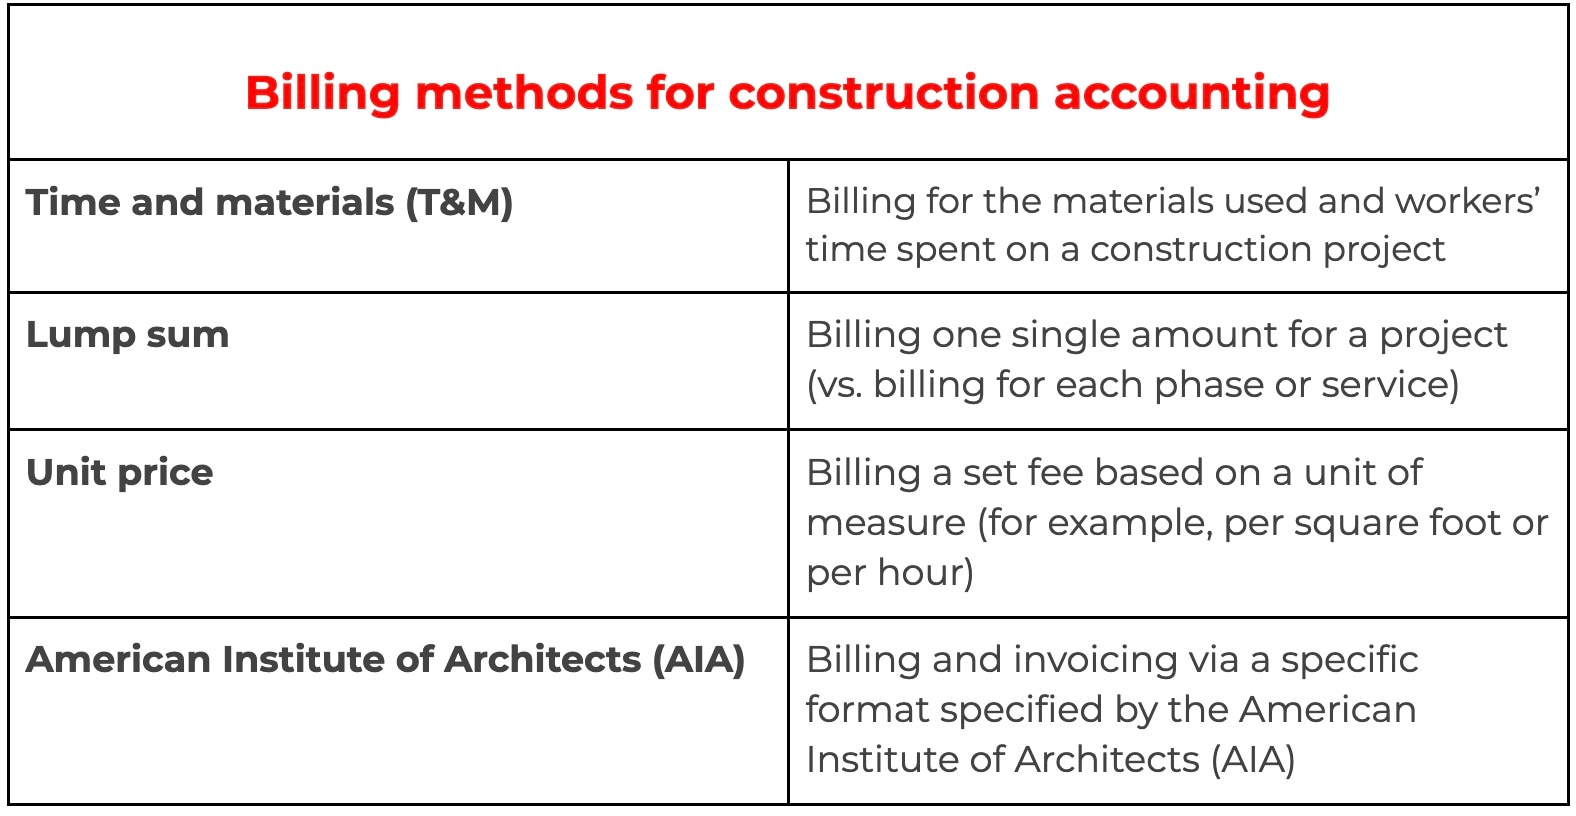 Billing methods for construction accounting.